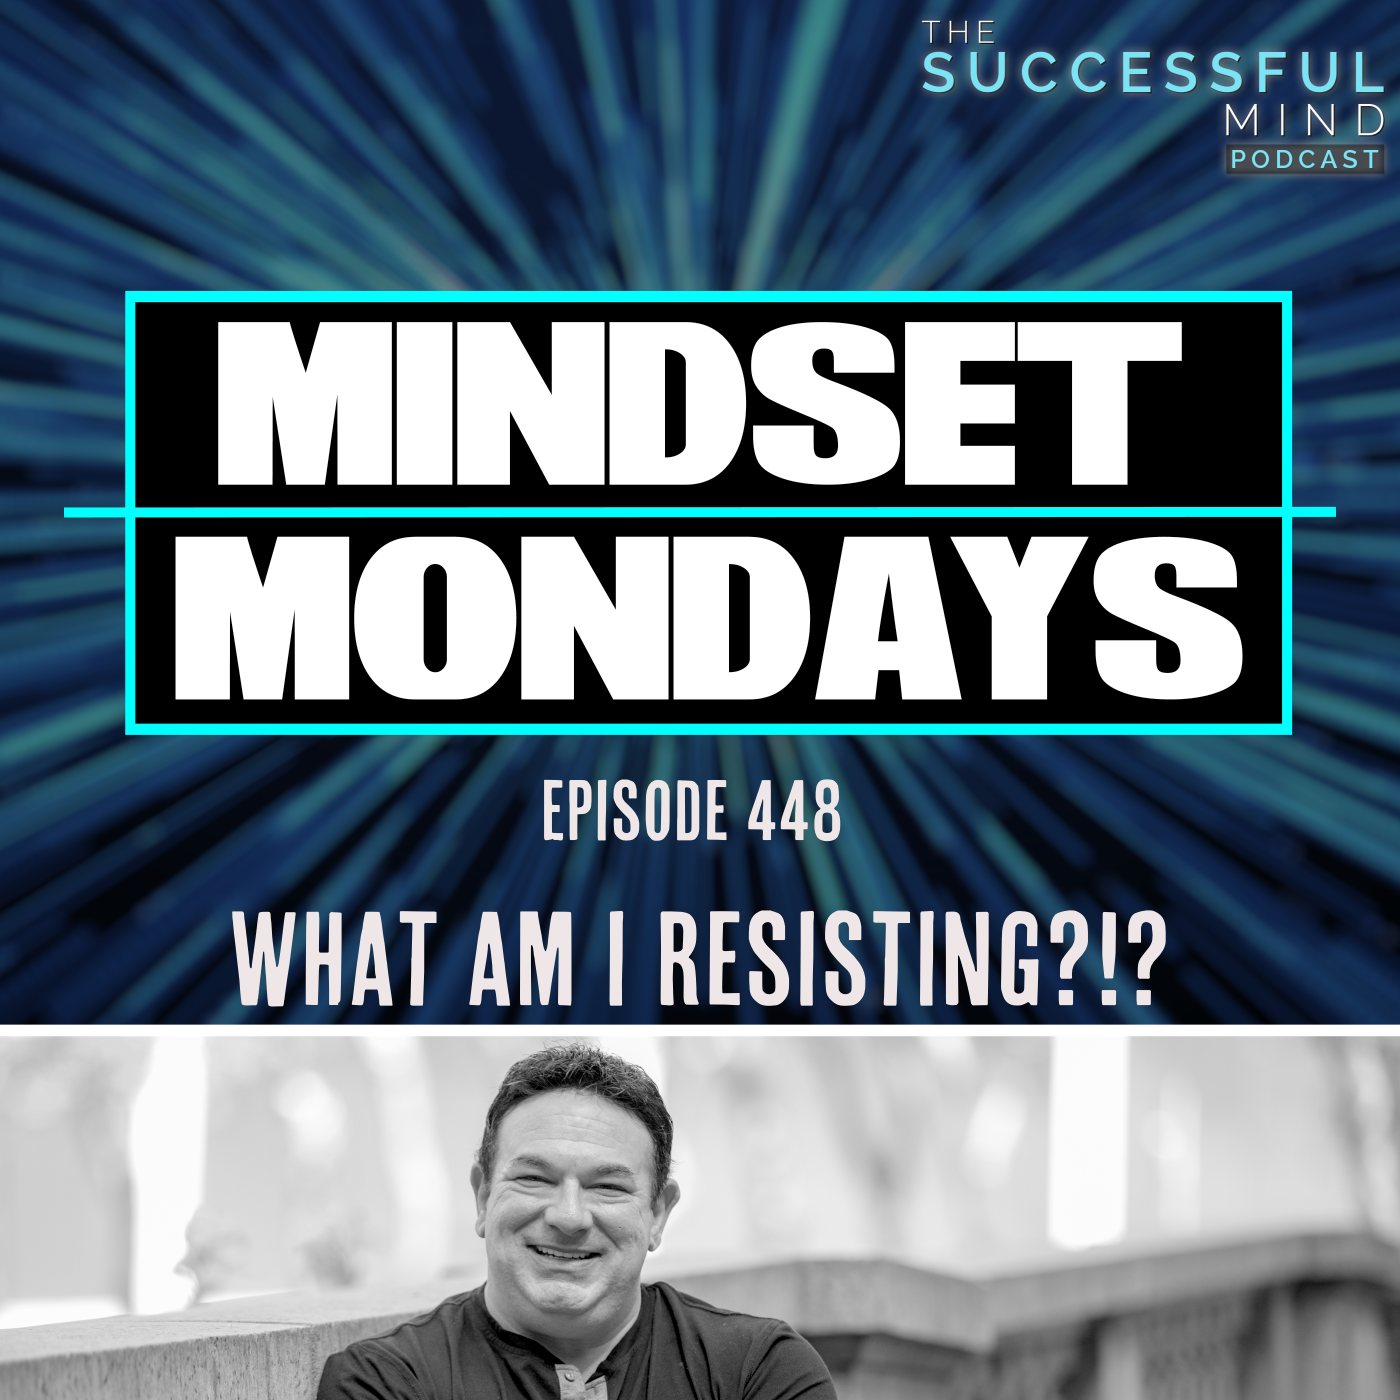 The Successful Mind Podcast - Episode 448 - What Am I Resisting?!?